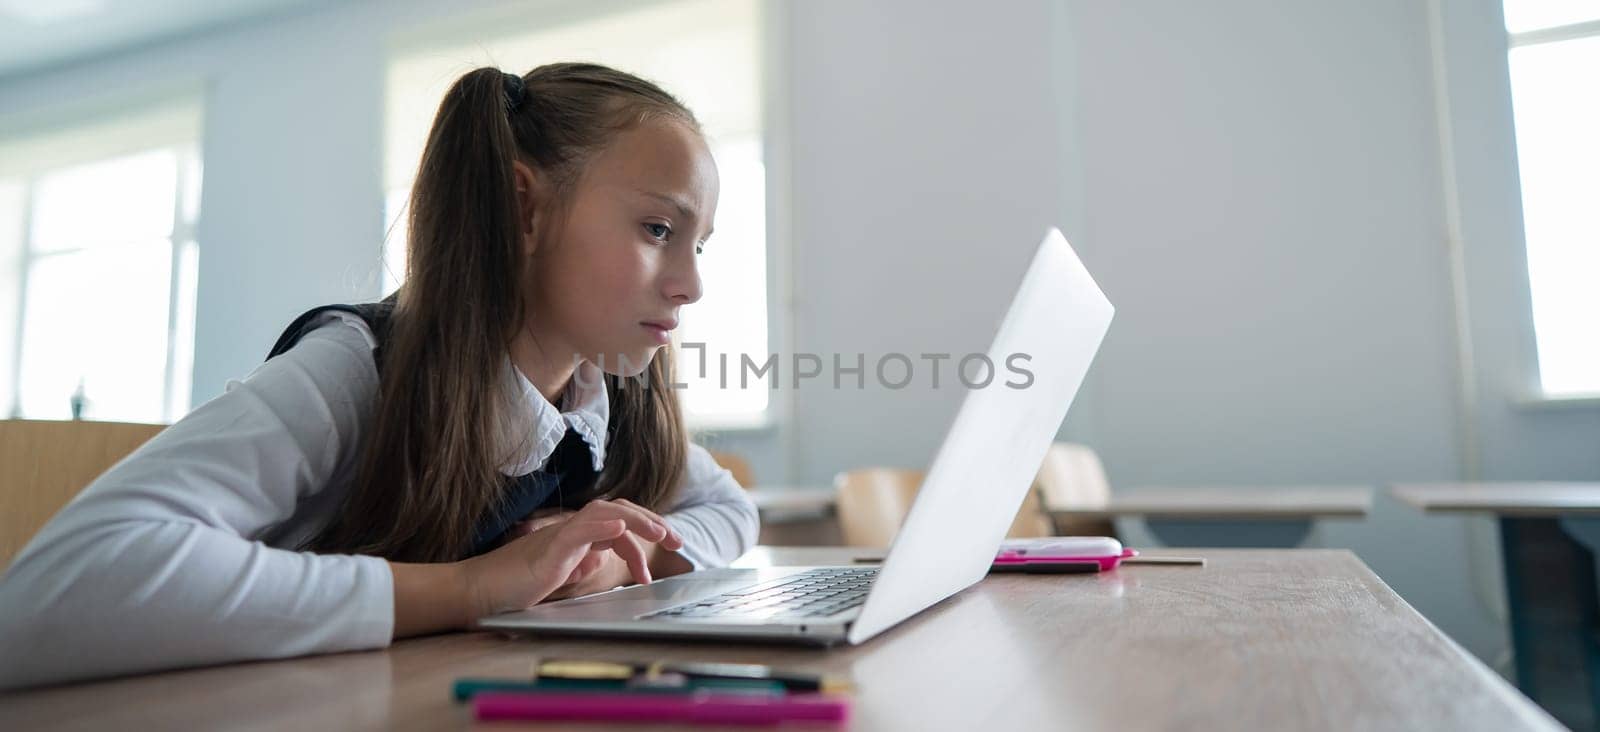 Caucasian girl sits at a desk at school and carefully looks into a laptop. by mrwed54